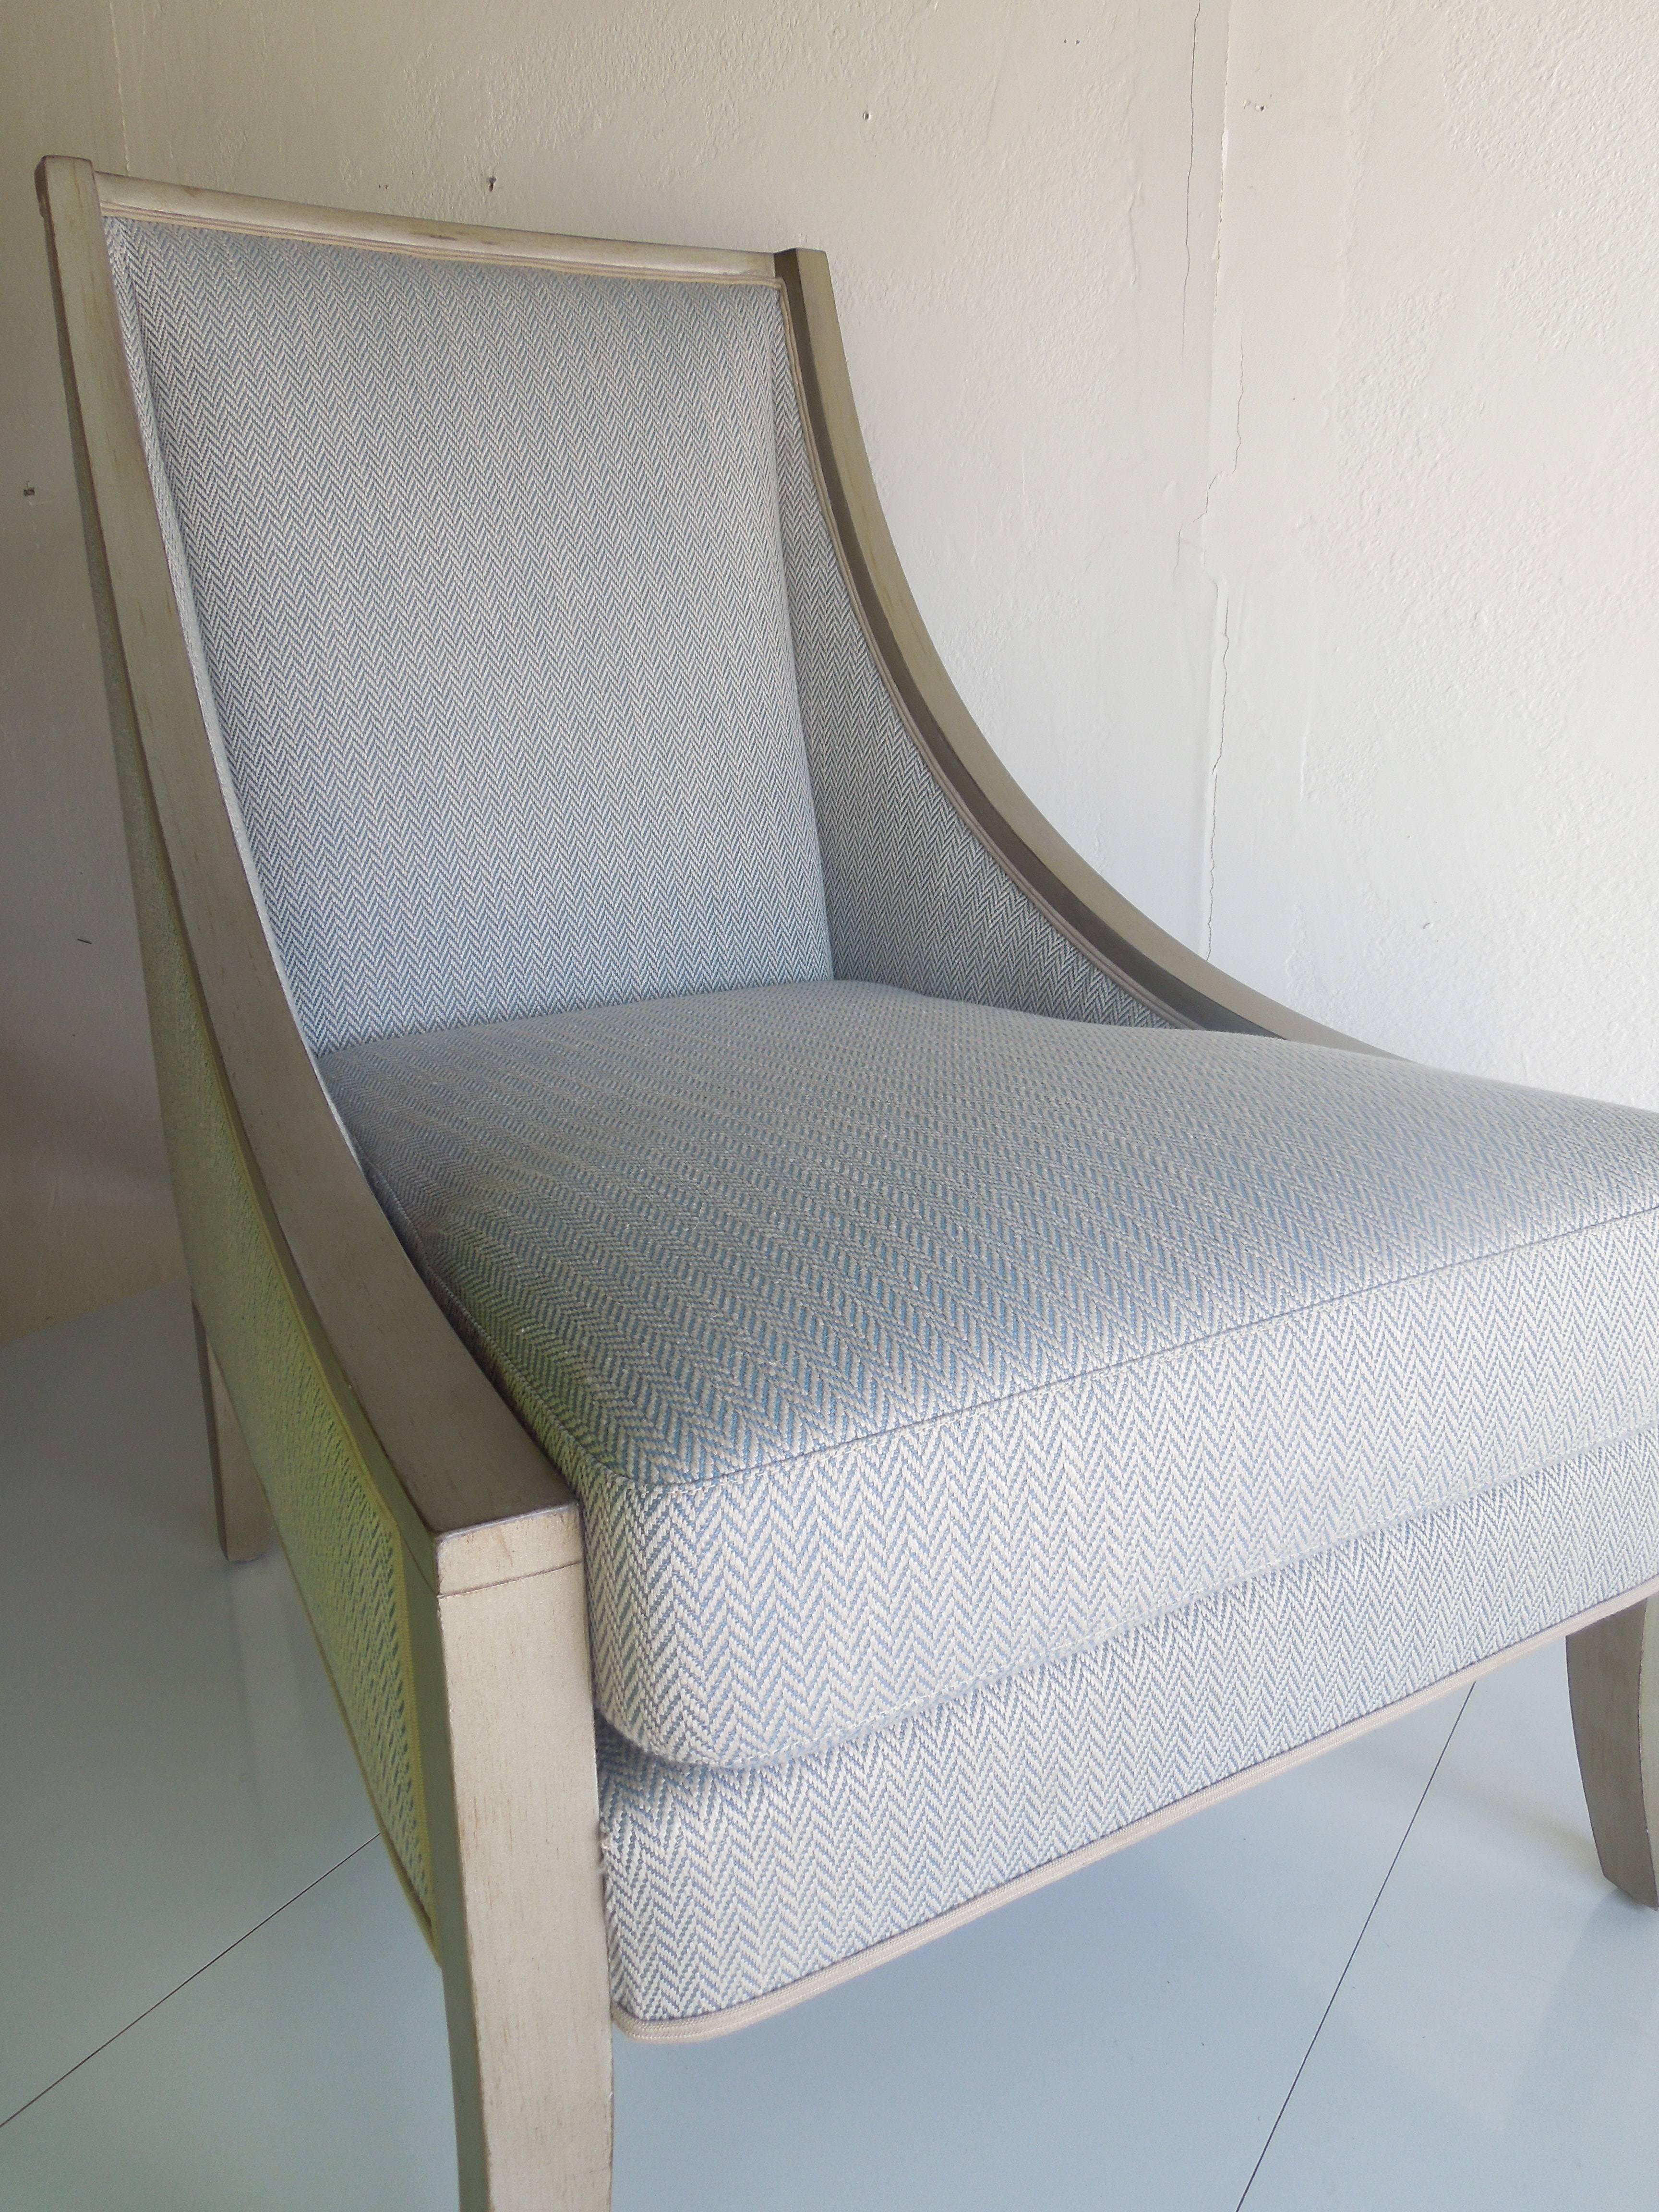 A beautiful custom-made slipper chair. Upholstered in a very high end blue and crème herringbone chair with antique solver wood frame is accented with a designer whimsical and very chic bird print. Made in Los Angeles by expert craftsmen used by